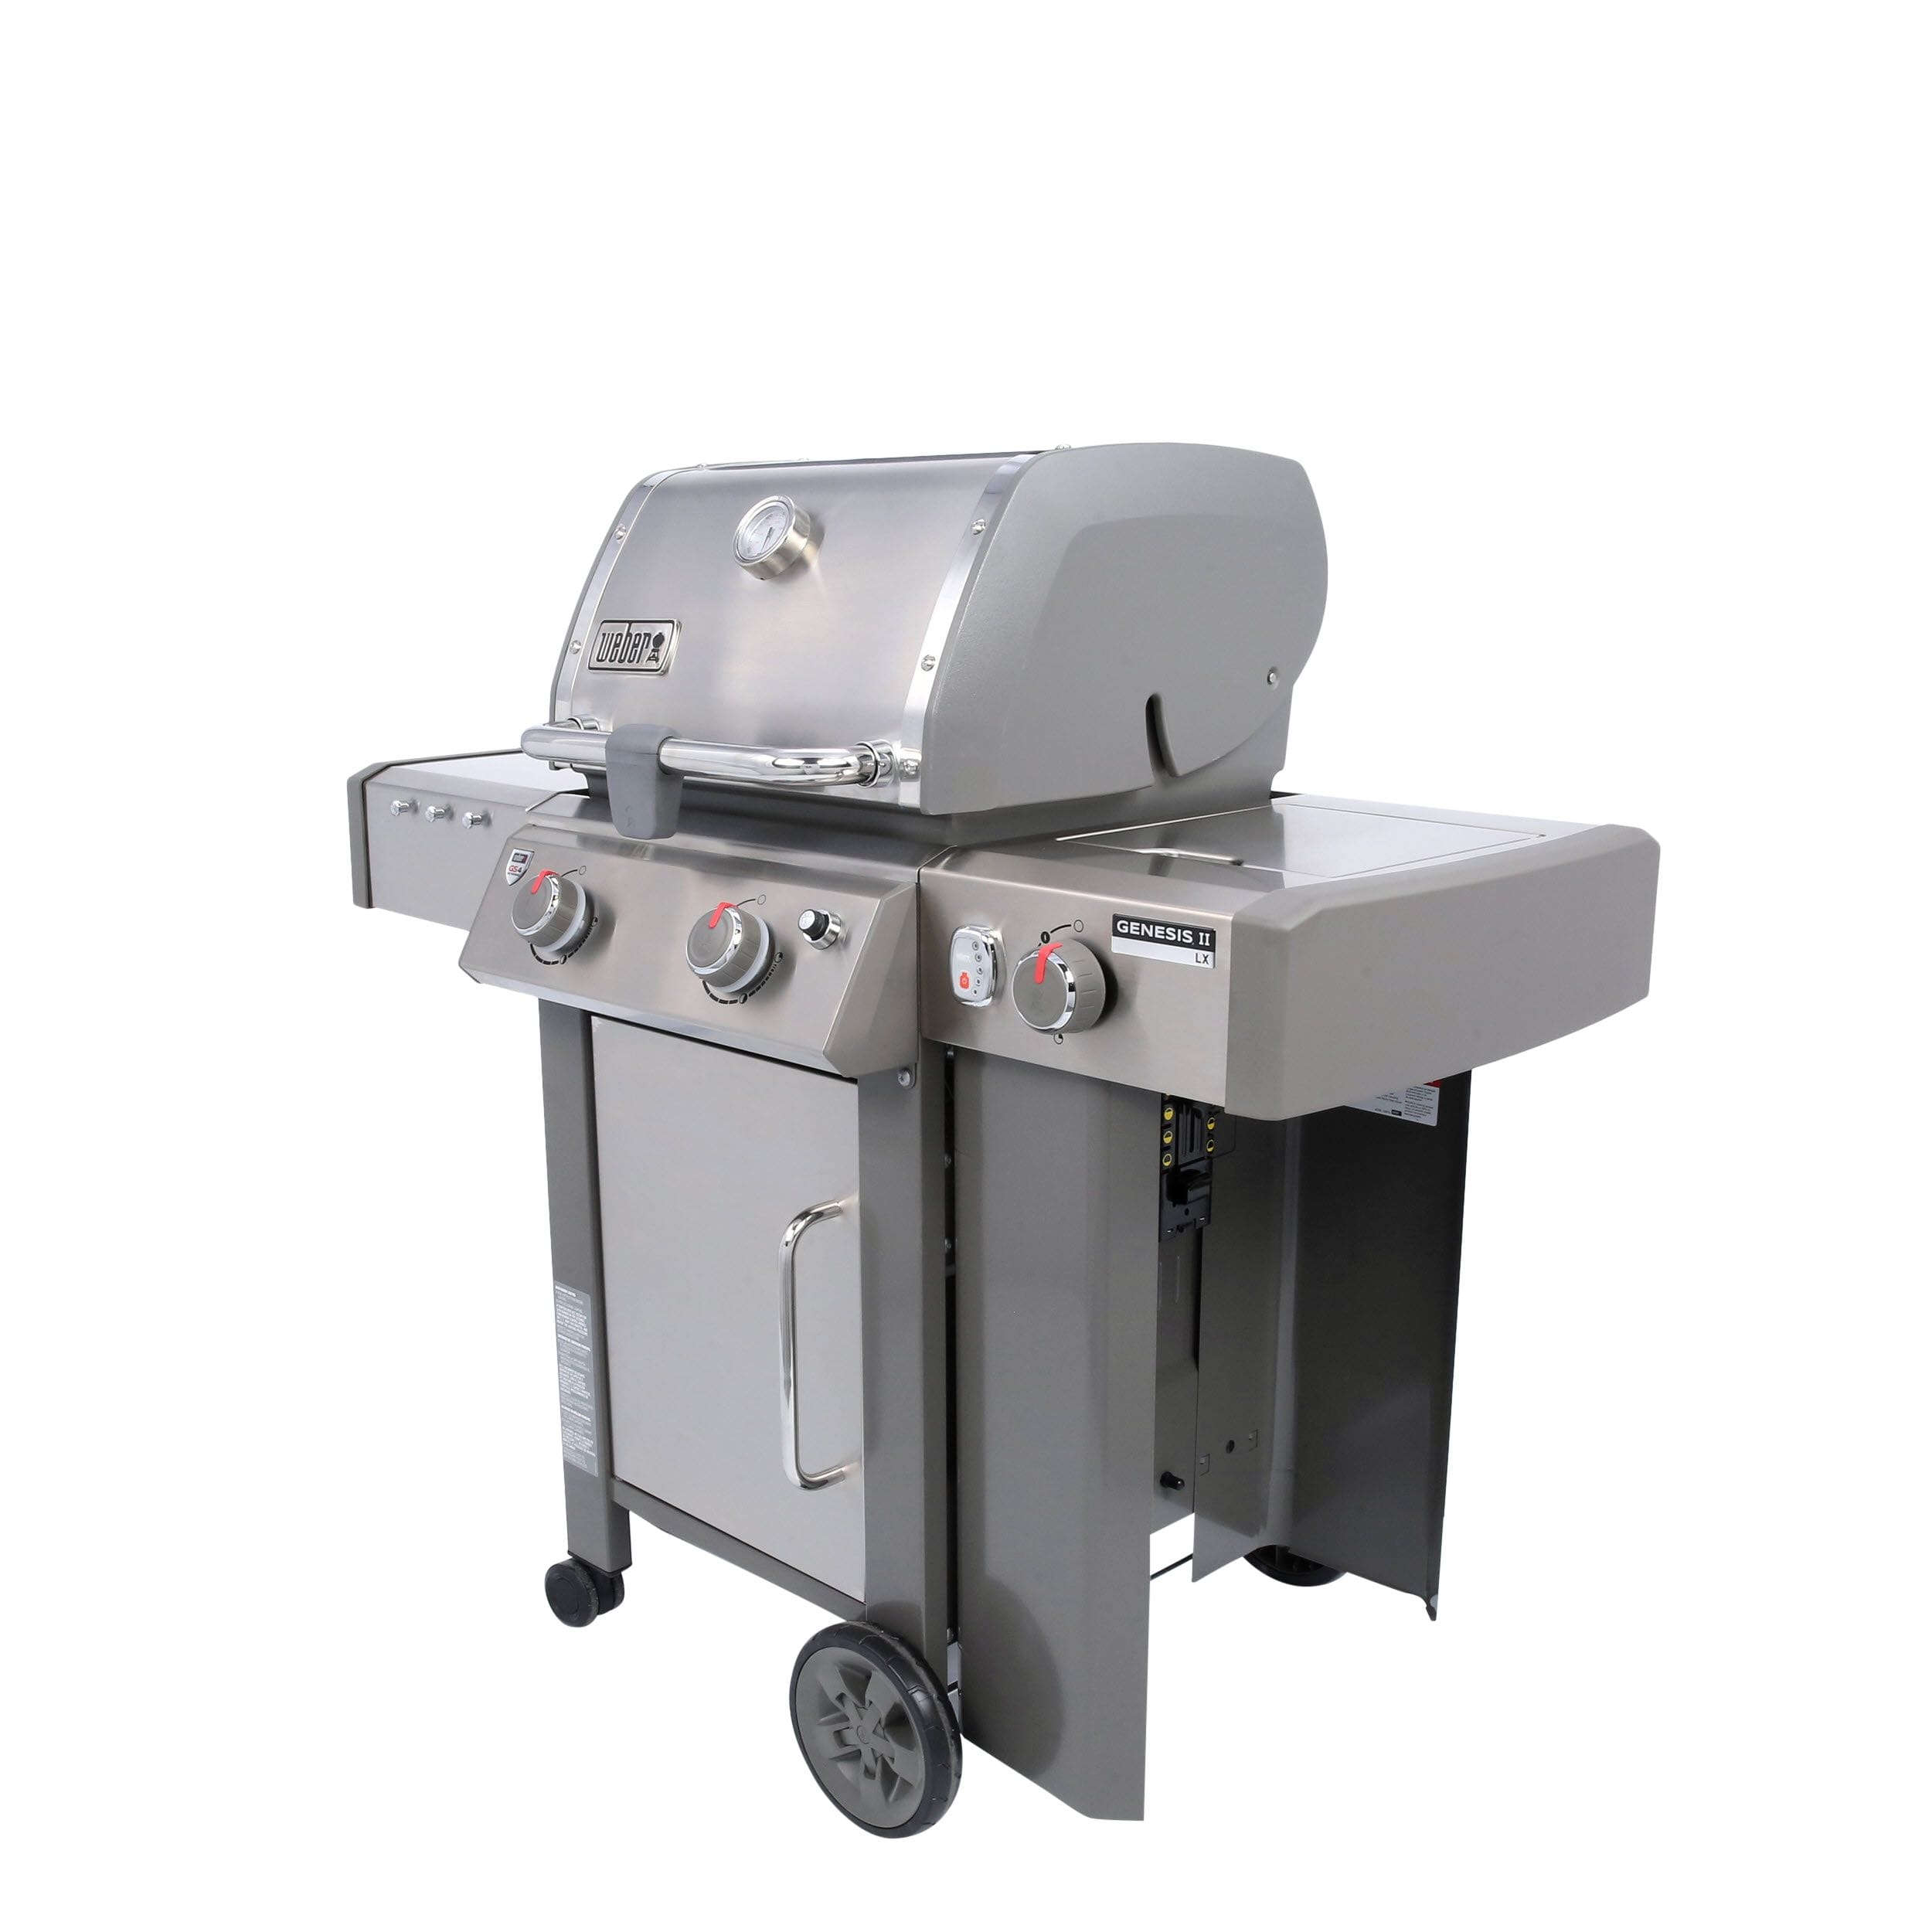 Weber 42204 LX S-240 Stainless Steel Liquid Gas Grill with 1 Side at Lowes.com